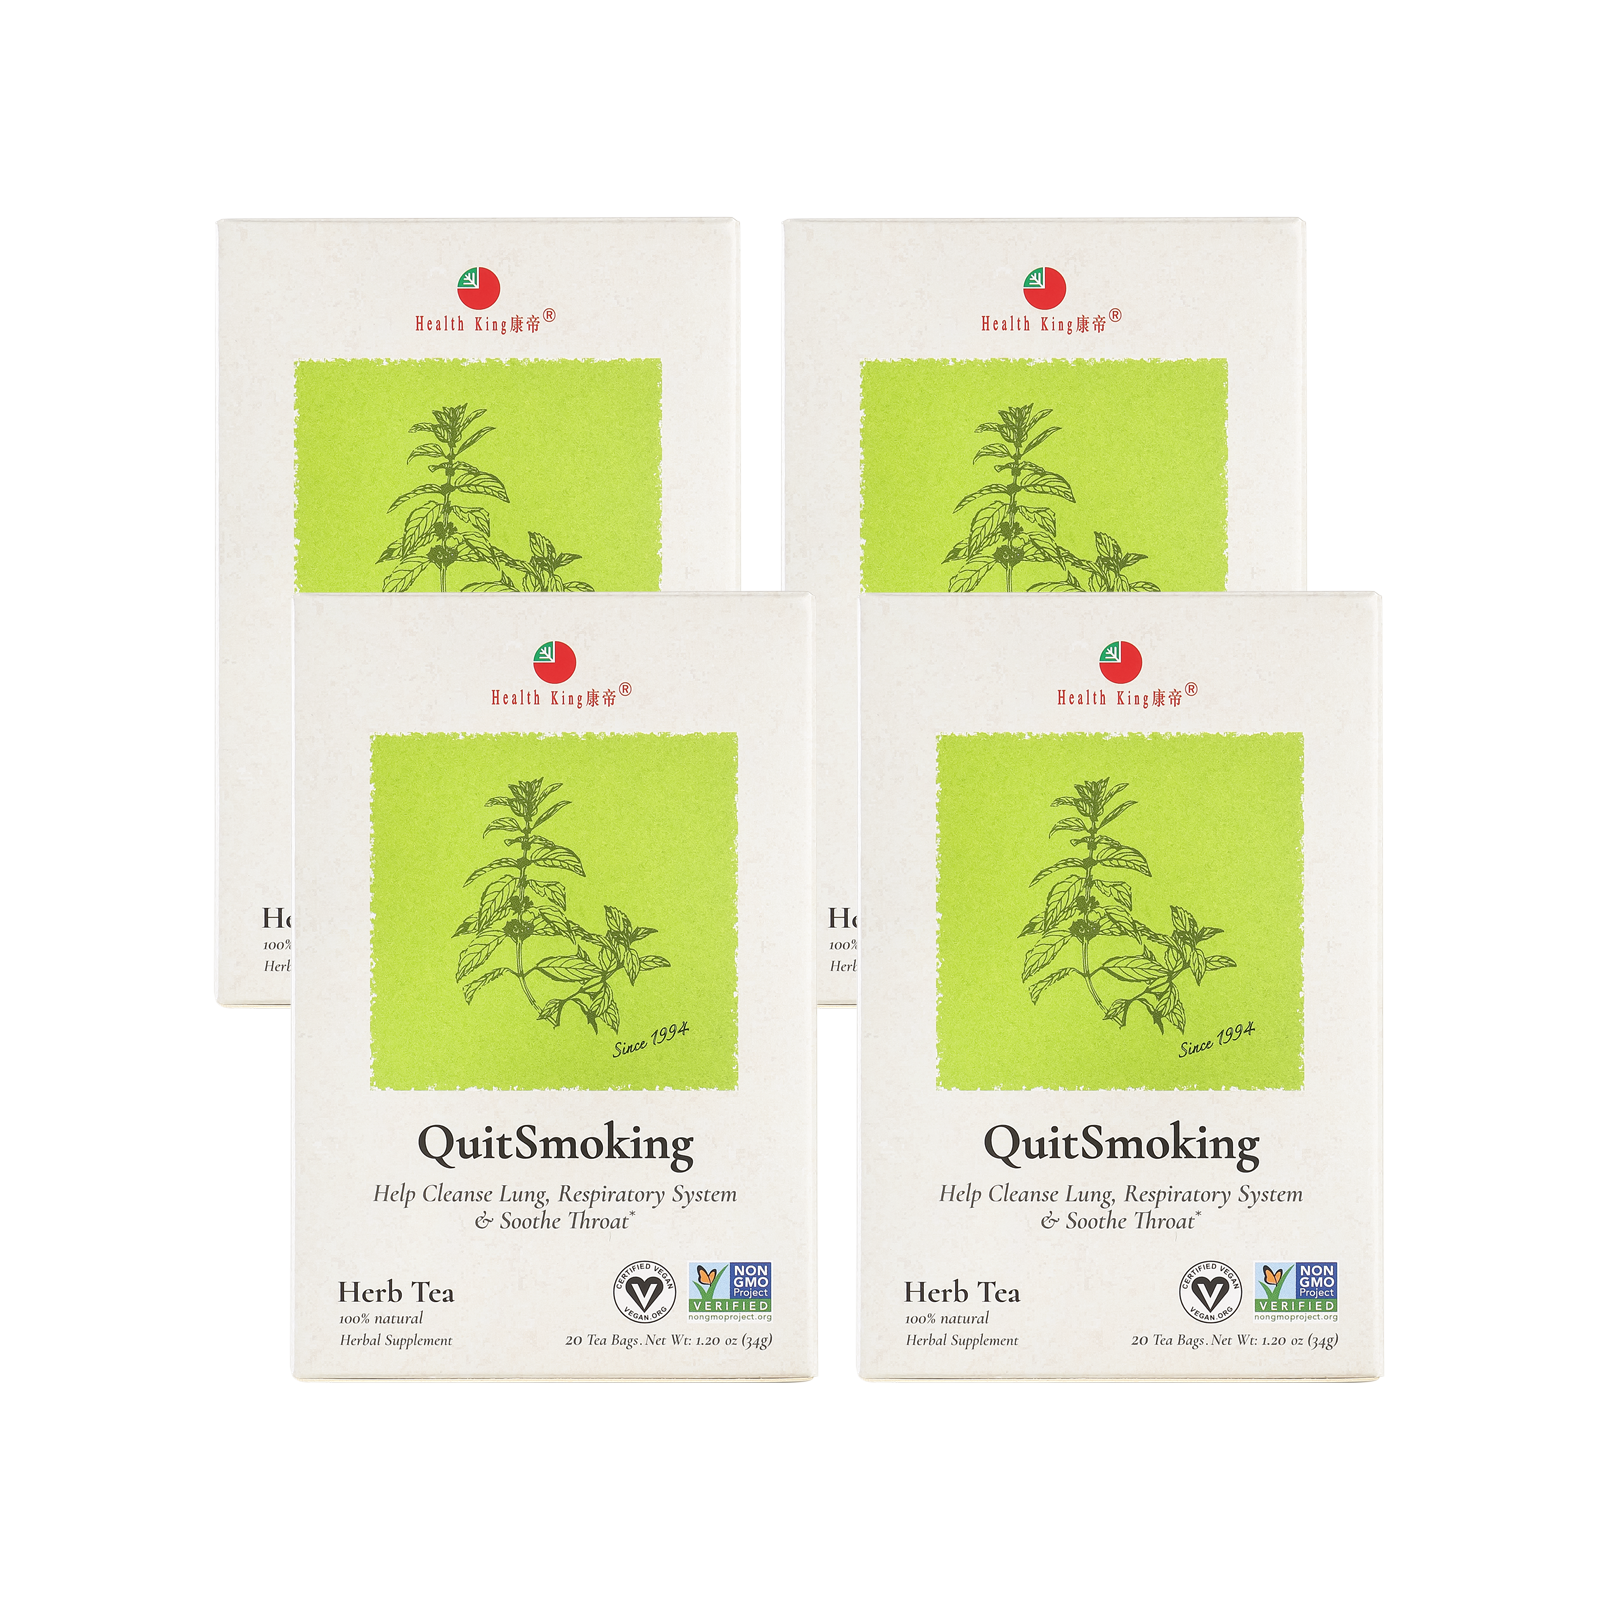 Four of Quit Smoking Herb Tea boxes, each promoting throat soothing and respiratory health